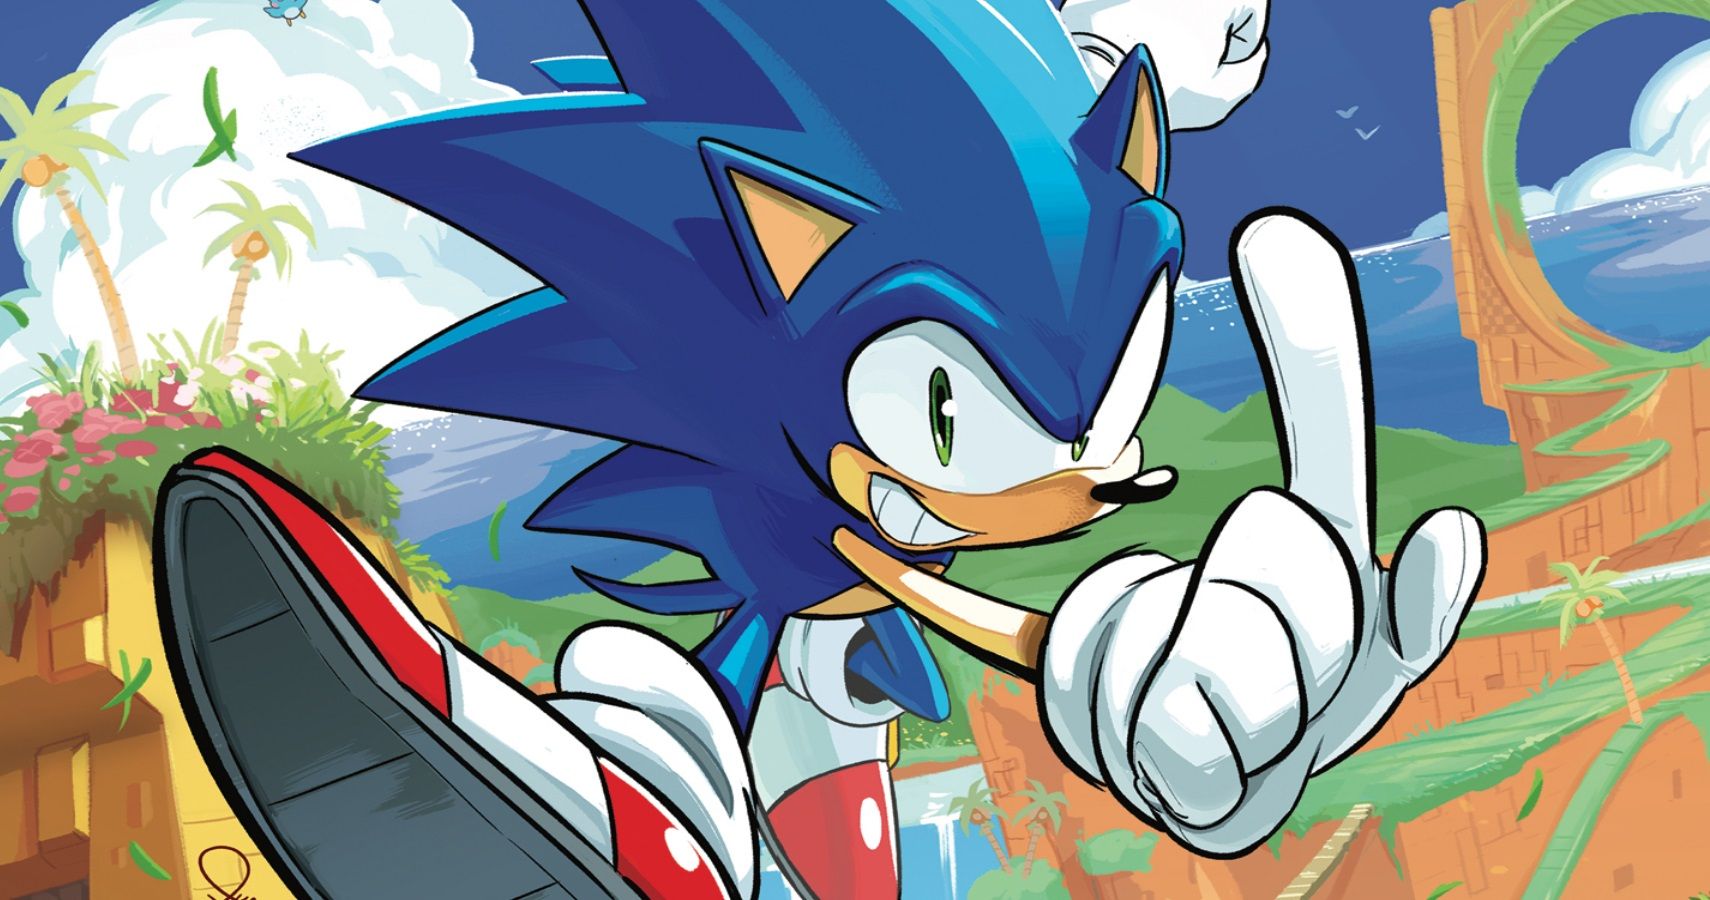 11 Comics You Should Read If You Loved The Sonic The Hedgehog Movie